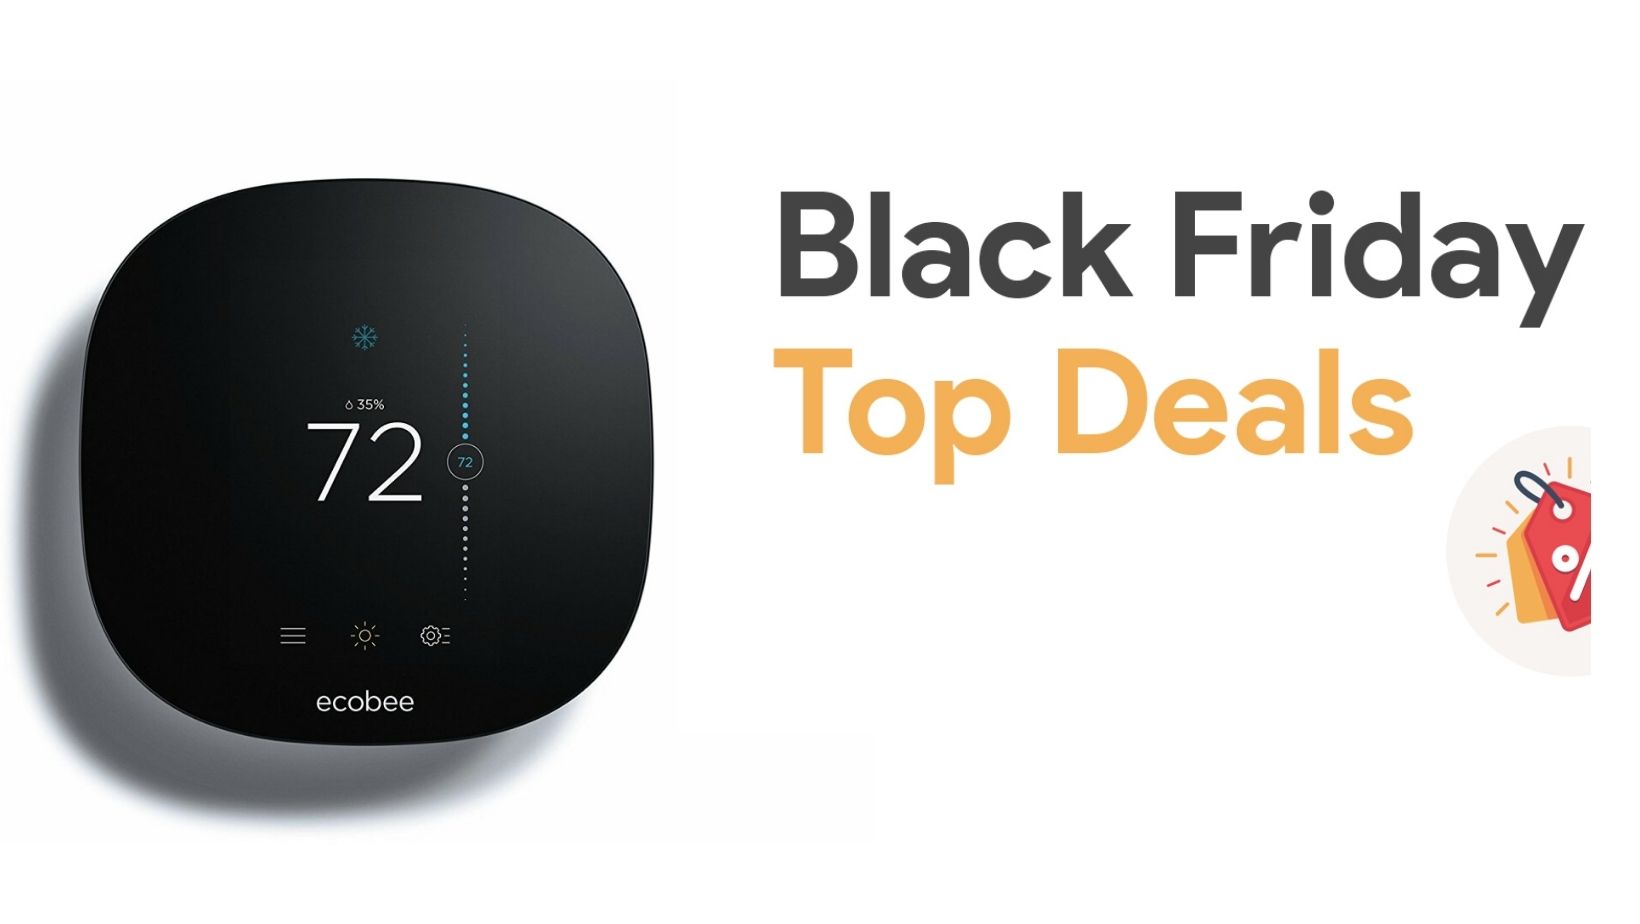 Thermostats Deals On Ecobee Black Friday 2021 & Cyber Monday 2021 (1)